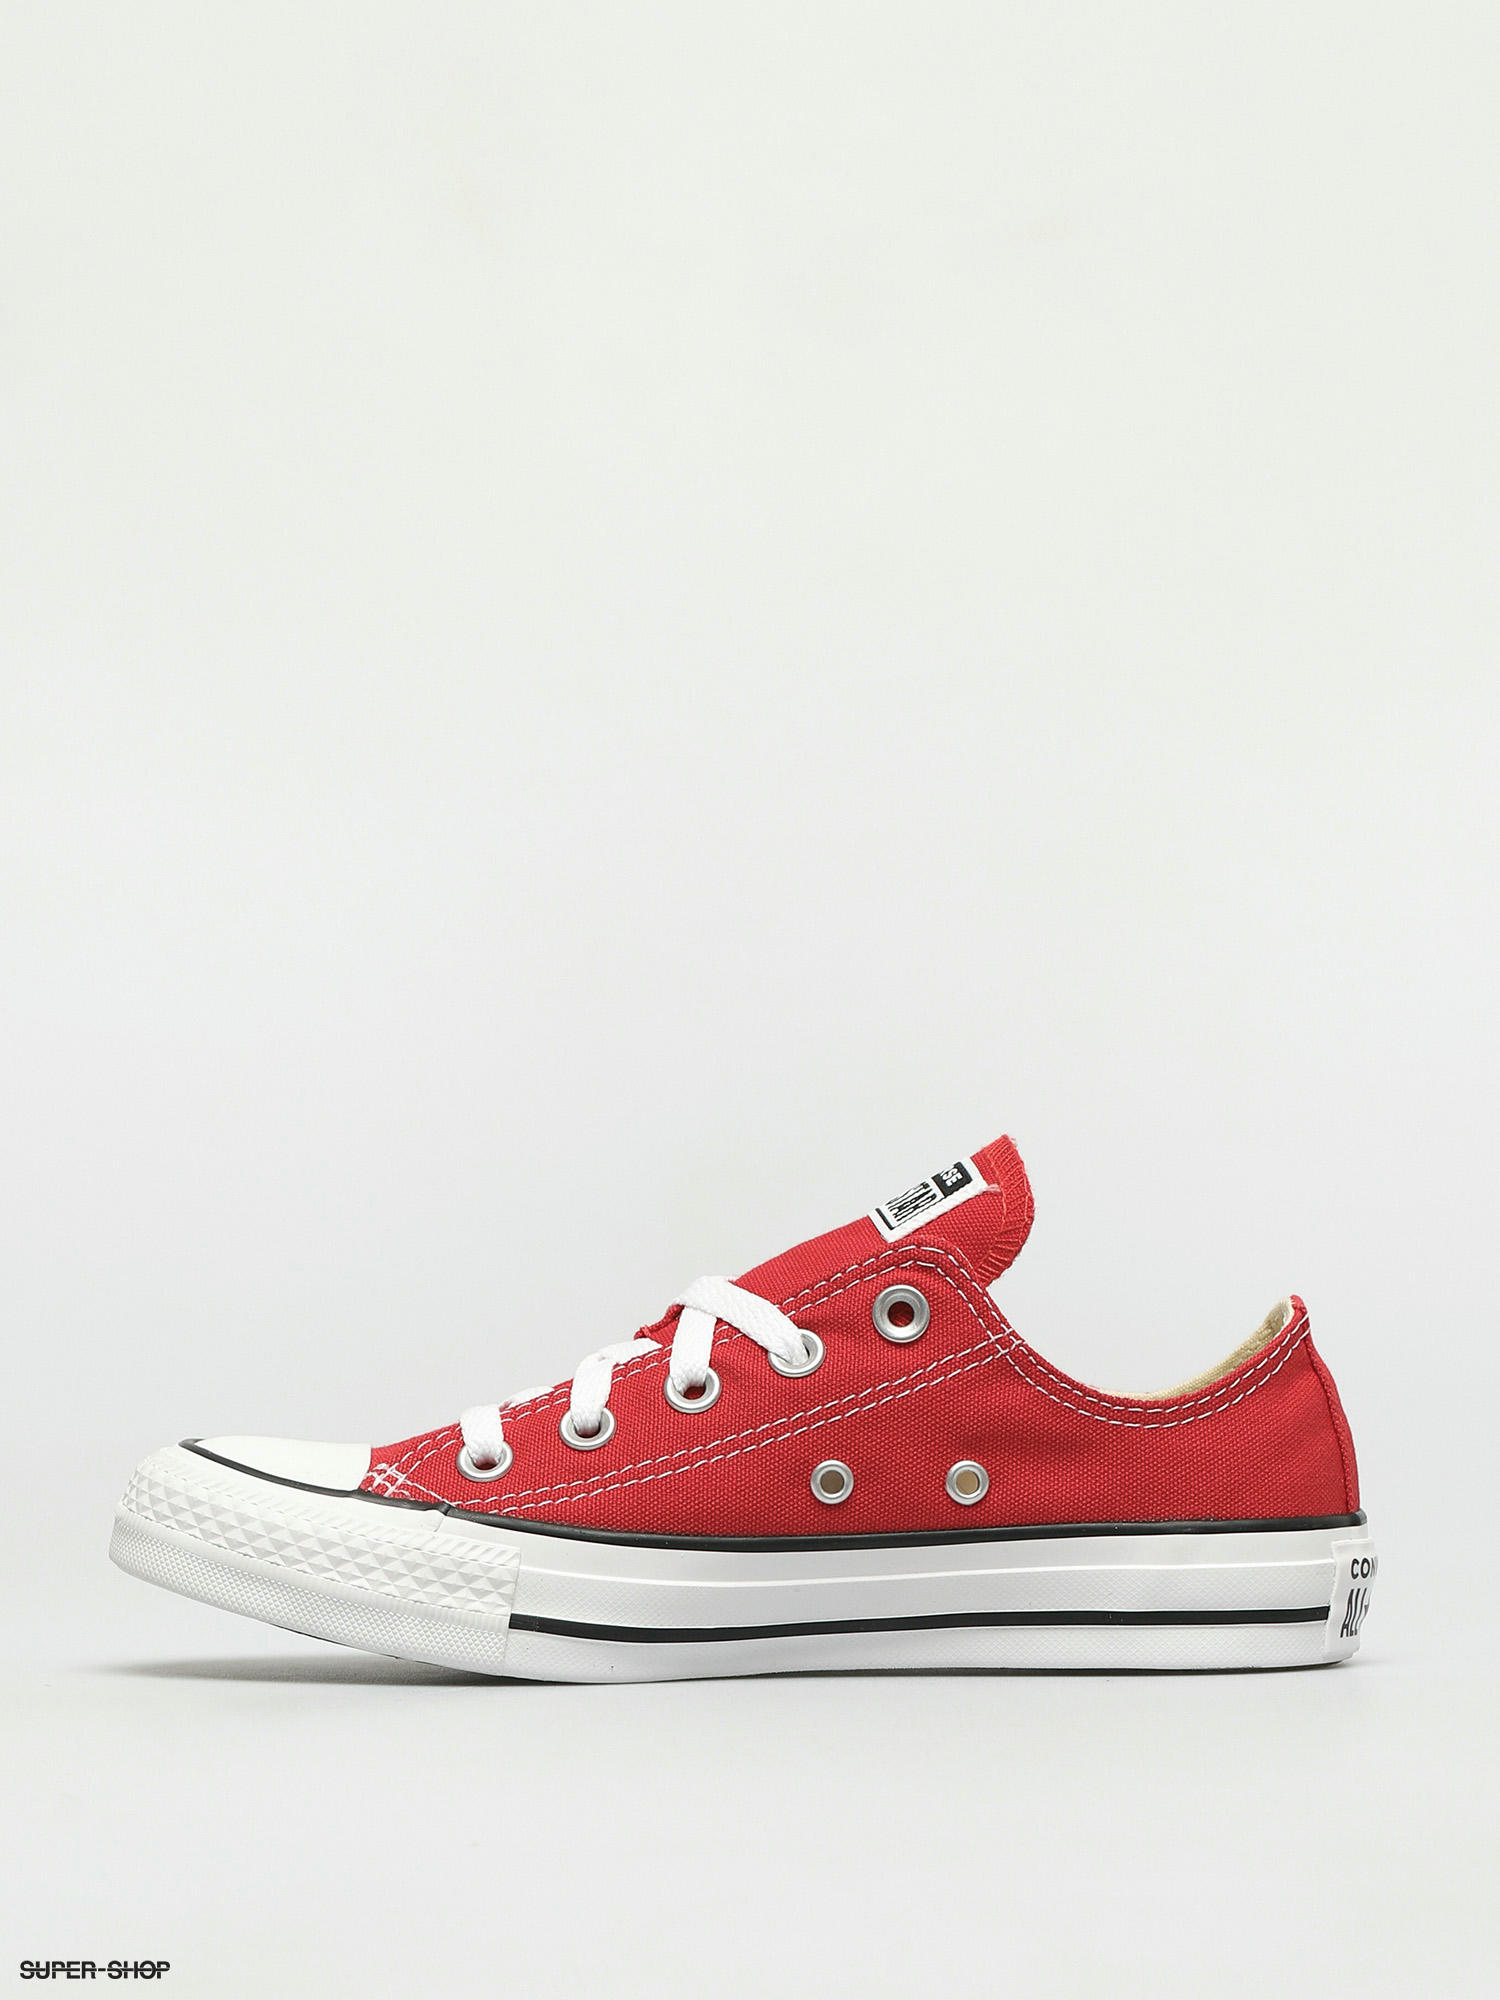 red low top chucks